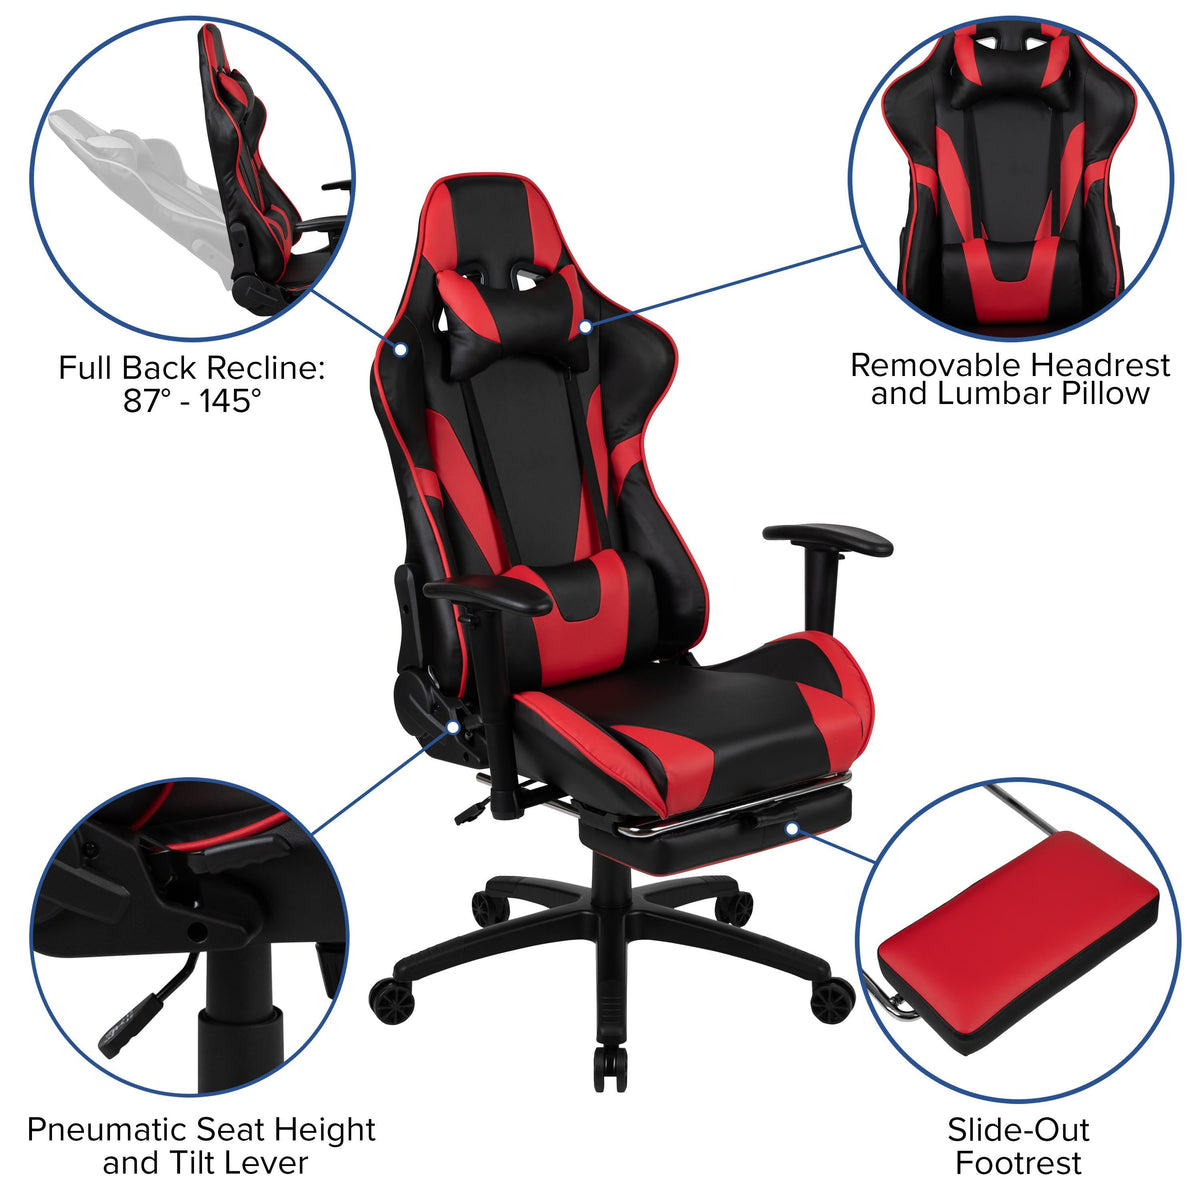 Red |#| Racing Gaming Ergonomic Chair with Reclining Back, Footrest in Red LeatherSoft